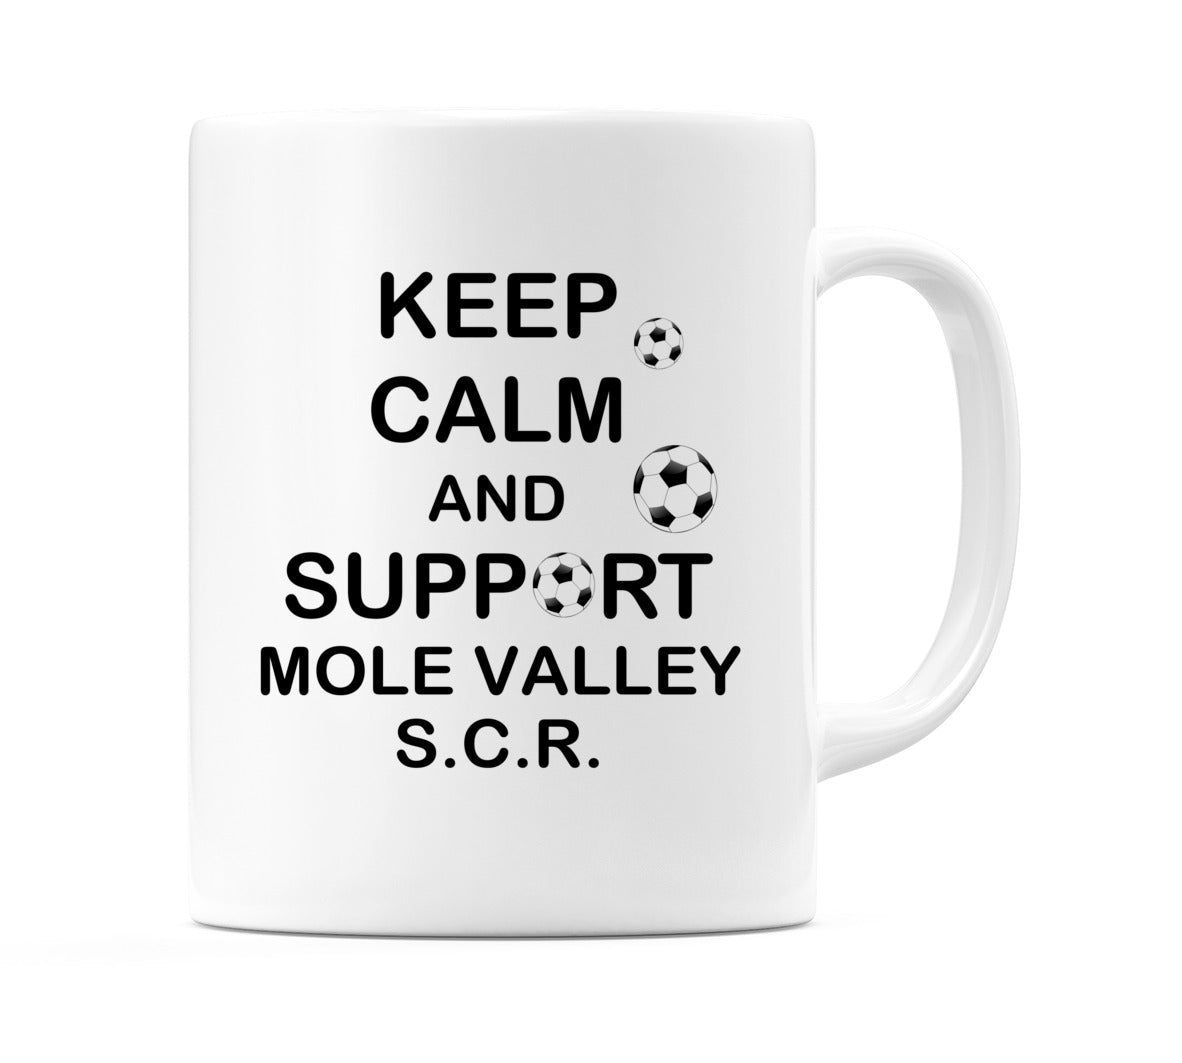 Keep Calm And Support Mole Valley S.C.R. Mug